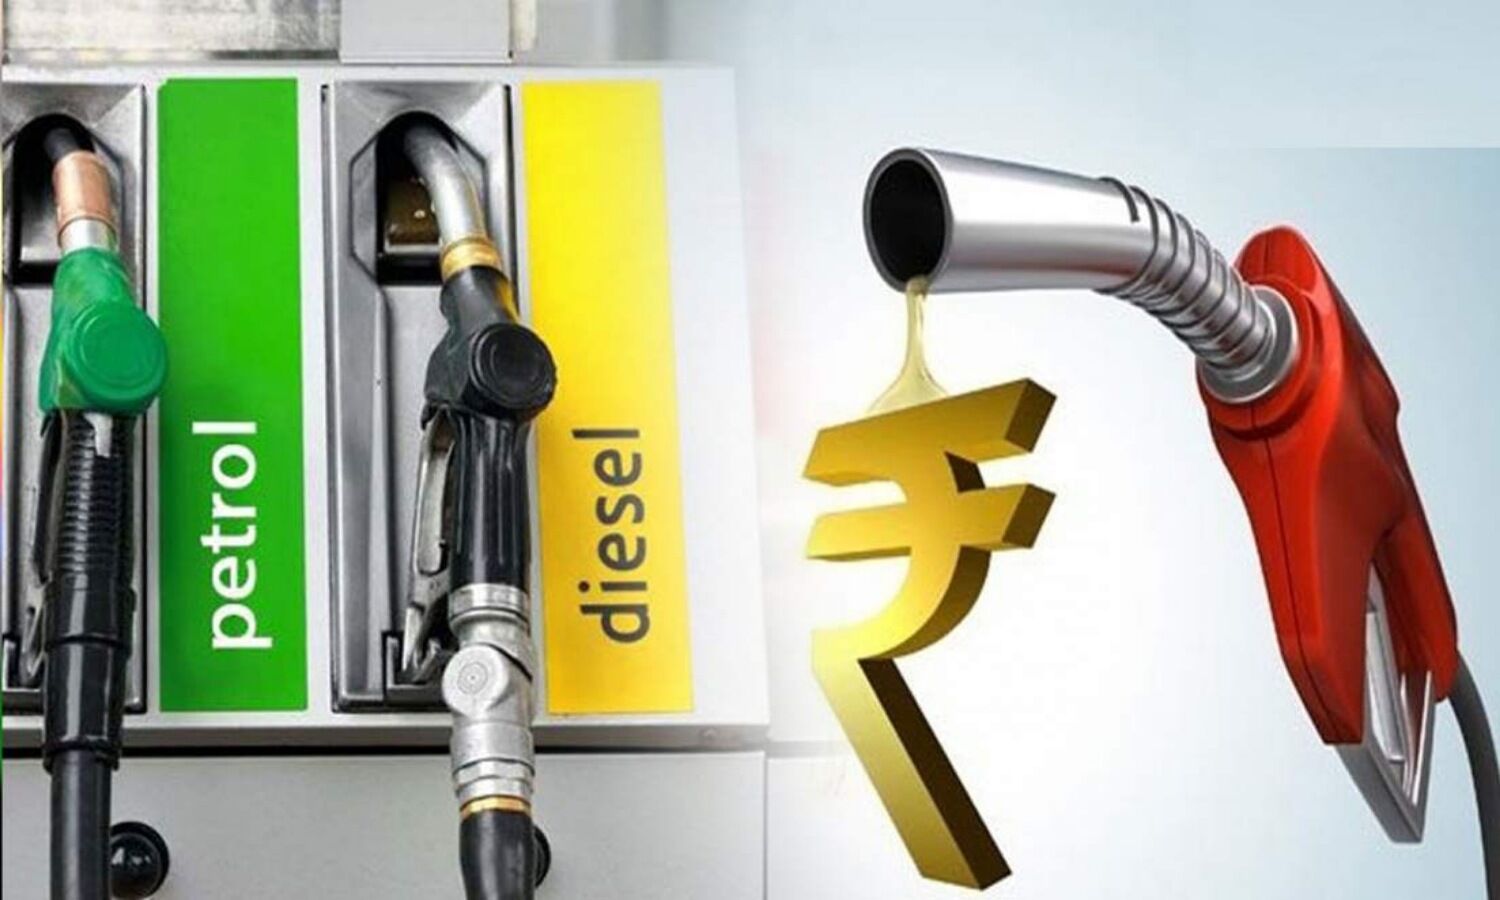 Petrol-Diesel Price Today: Oil companies have released the new rate, check the price of petrol and diesel today